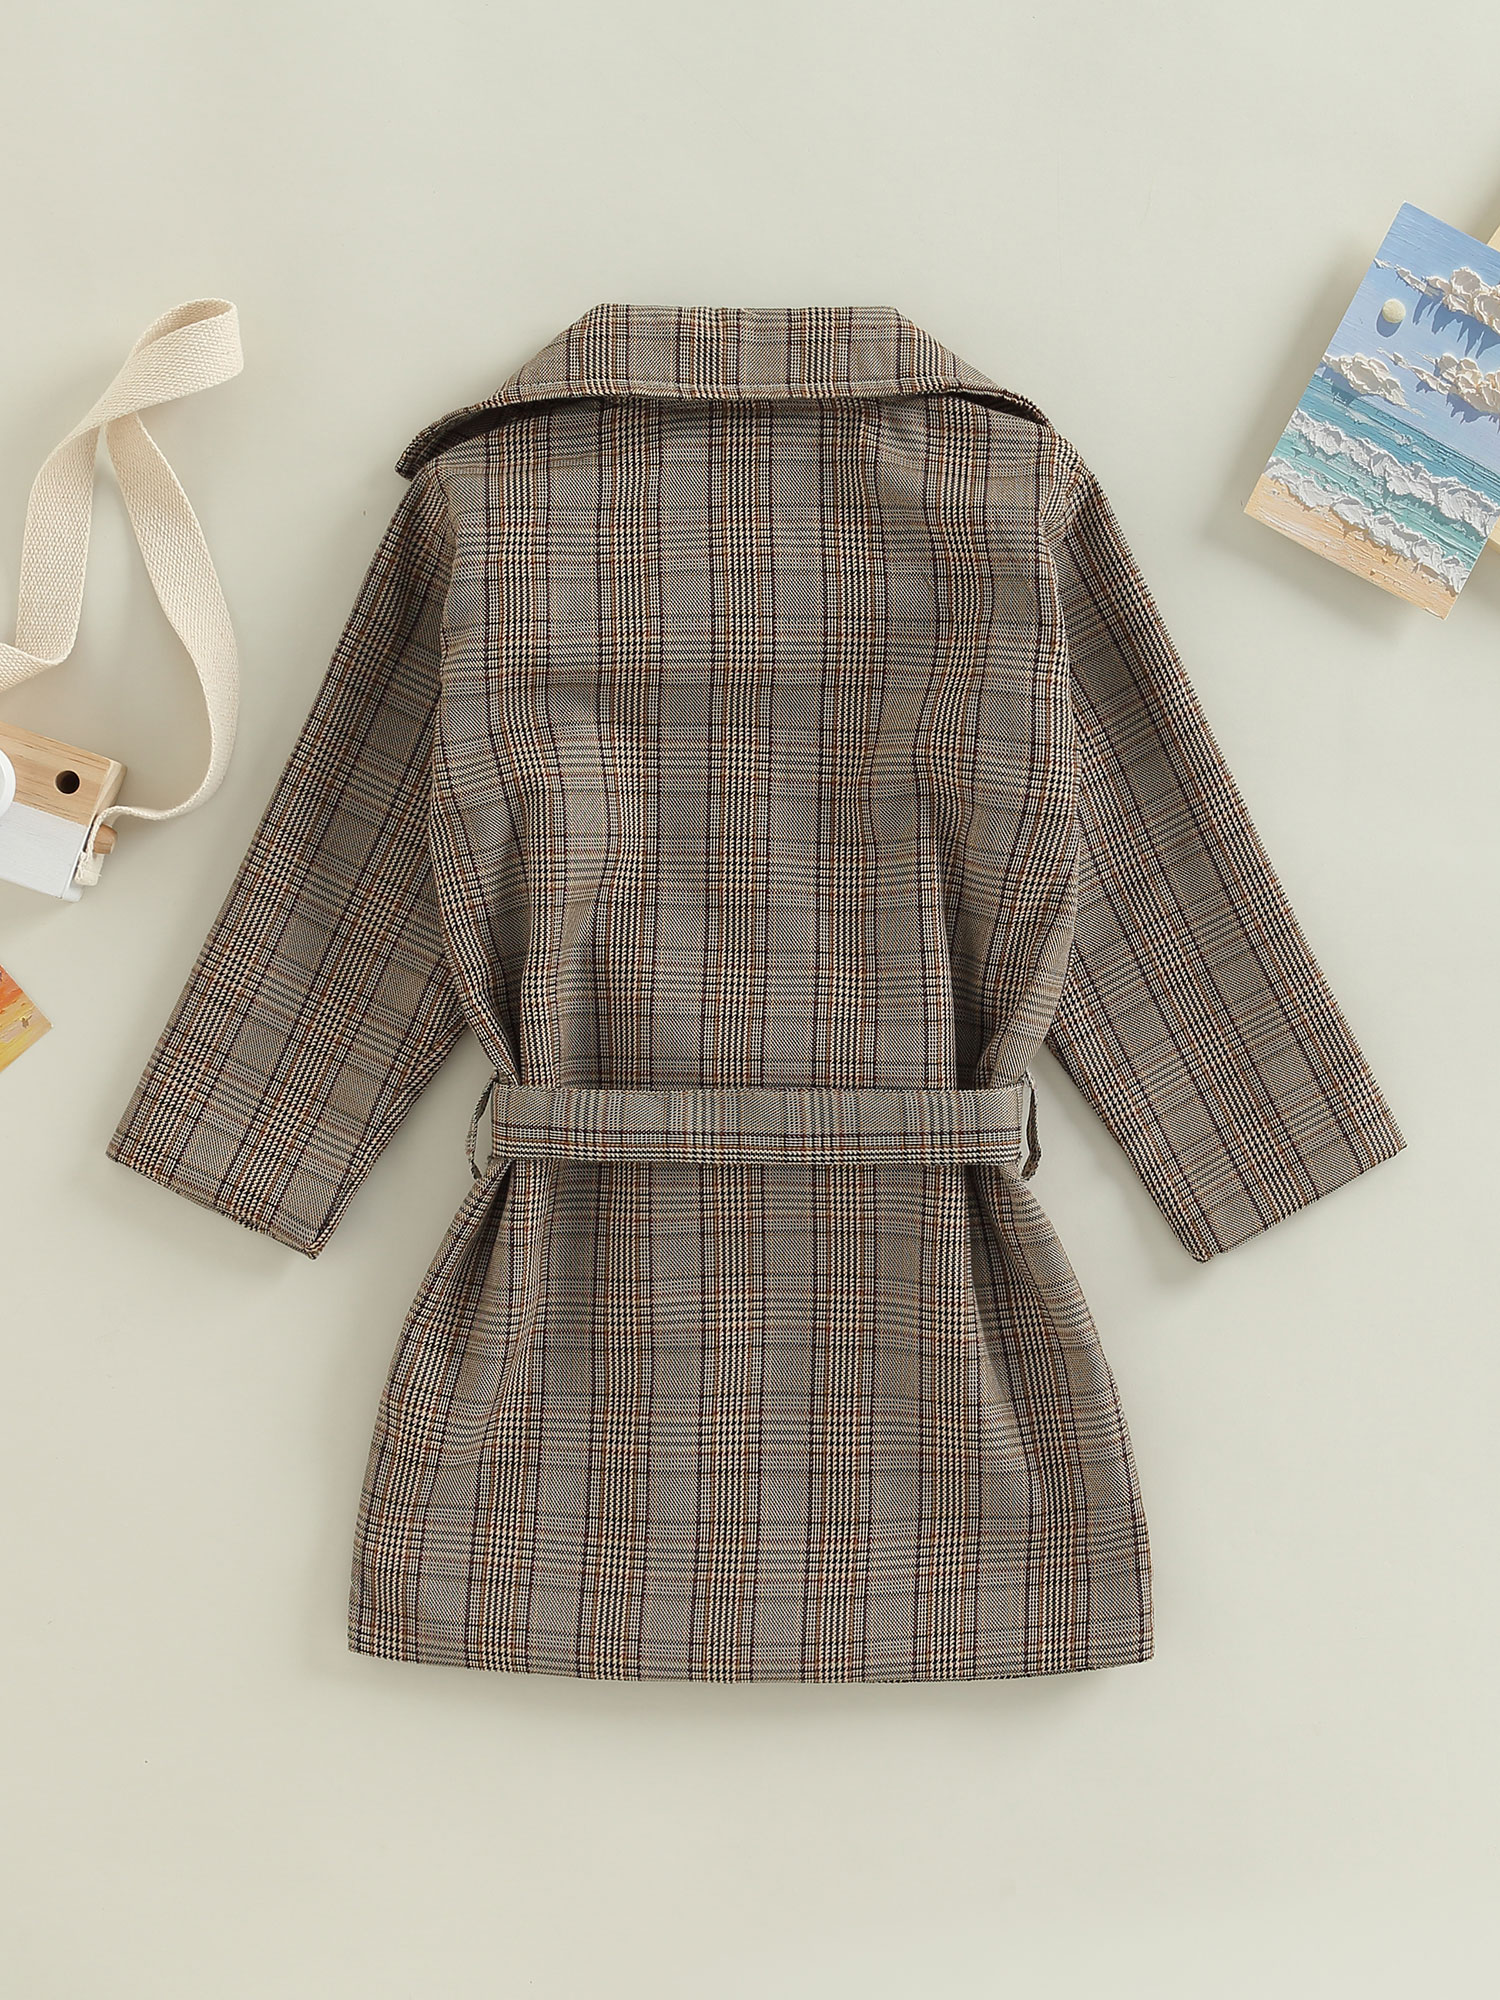 JYYYBF Toddler Baby Girl Trench Coat Long Sleeve Plaid Print Double-Breasted Belted Jacket Lapel Windbreaker Outerwear Grey 2-3 Years - image 5 of 7